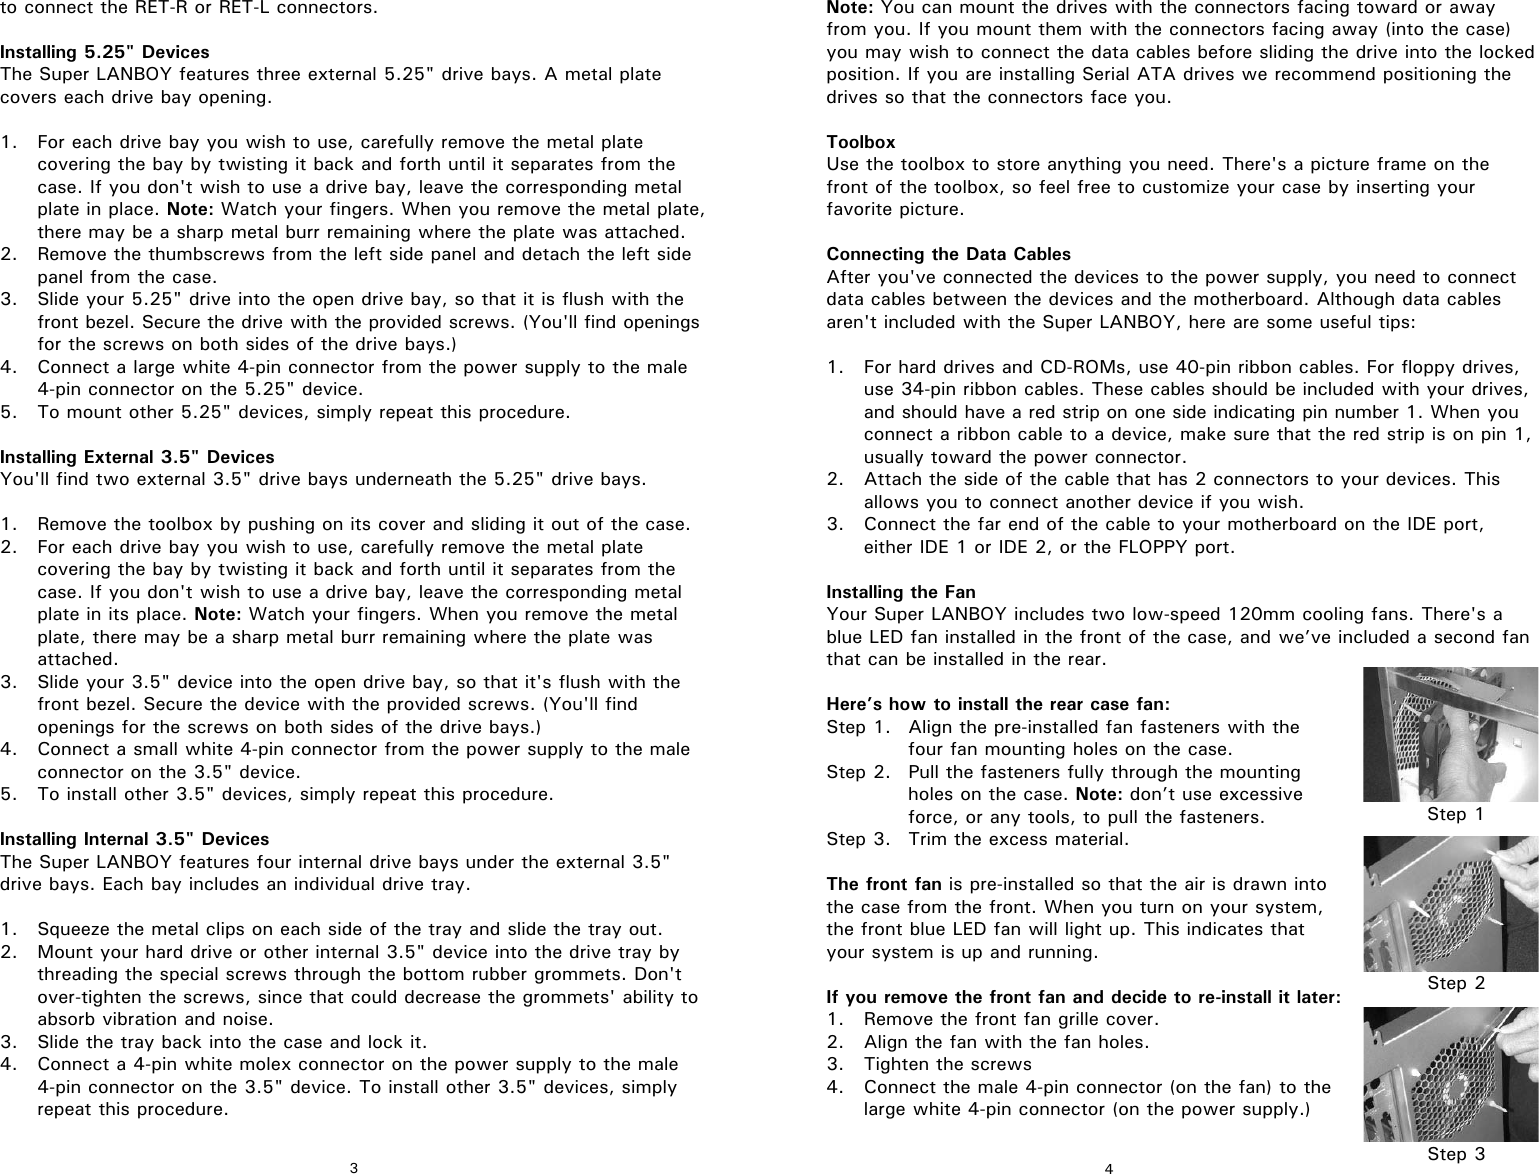 Page 3 of 5 - Antec Antec-Super-Lanboy-Users-Manual- SuperLanBoy_Manual_intl  Antec-super-lanboy-users-manual